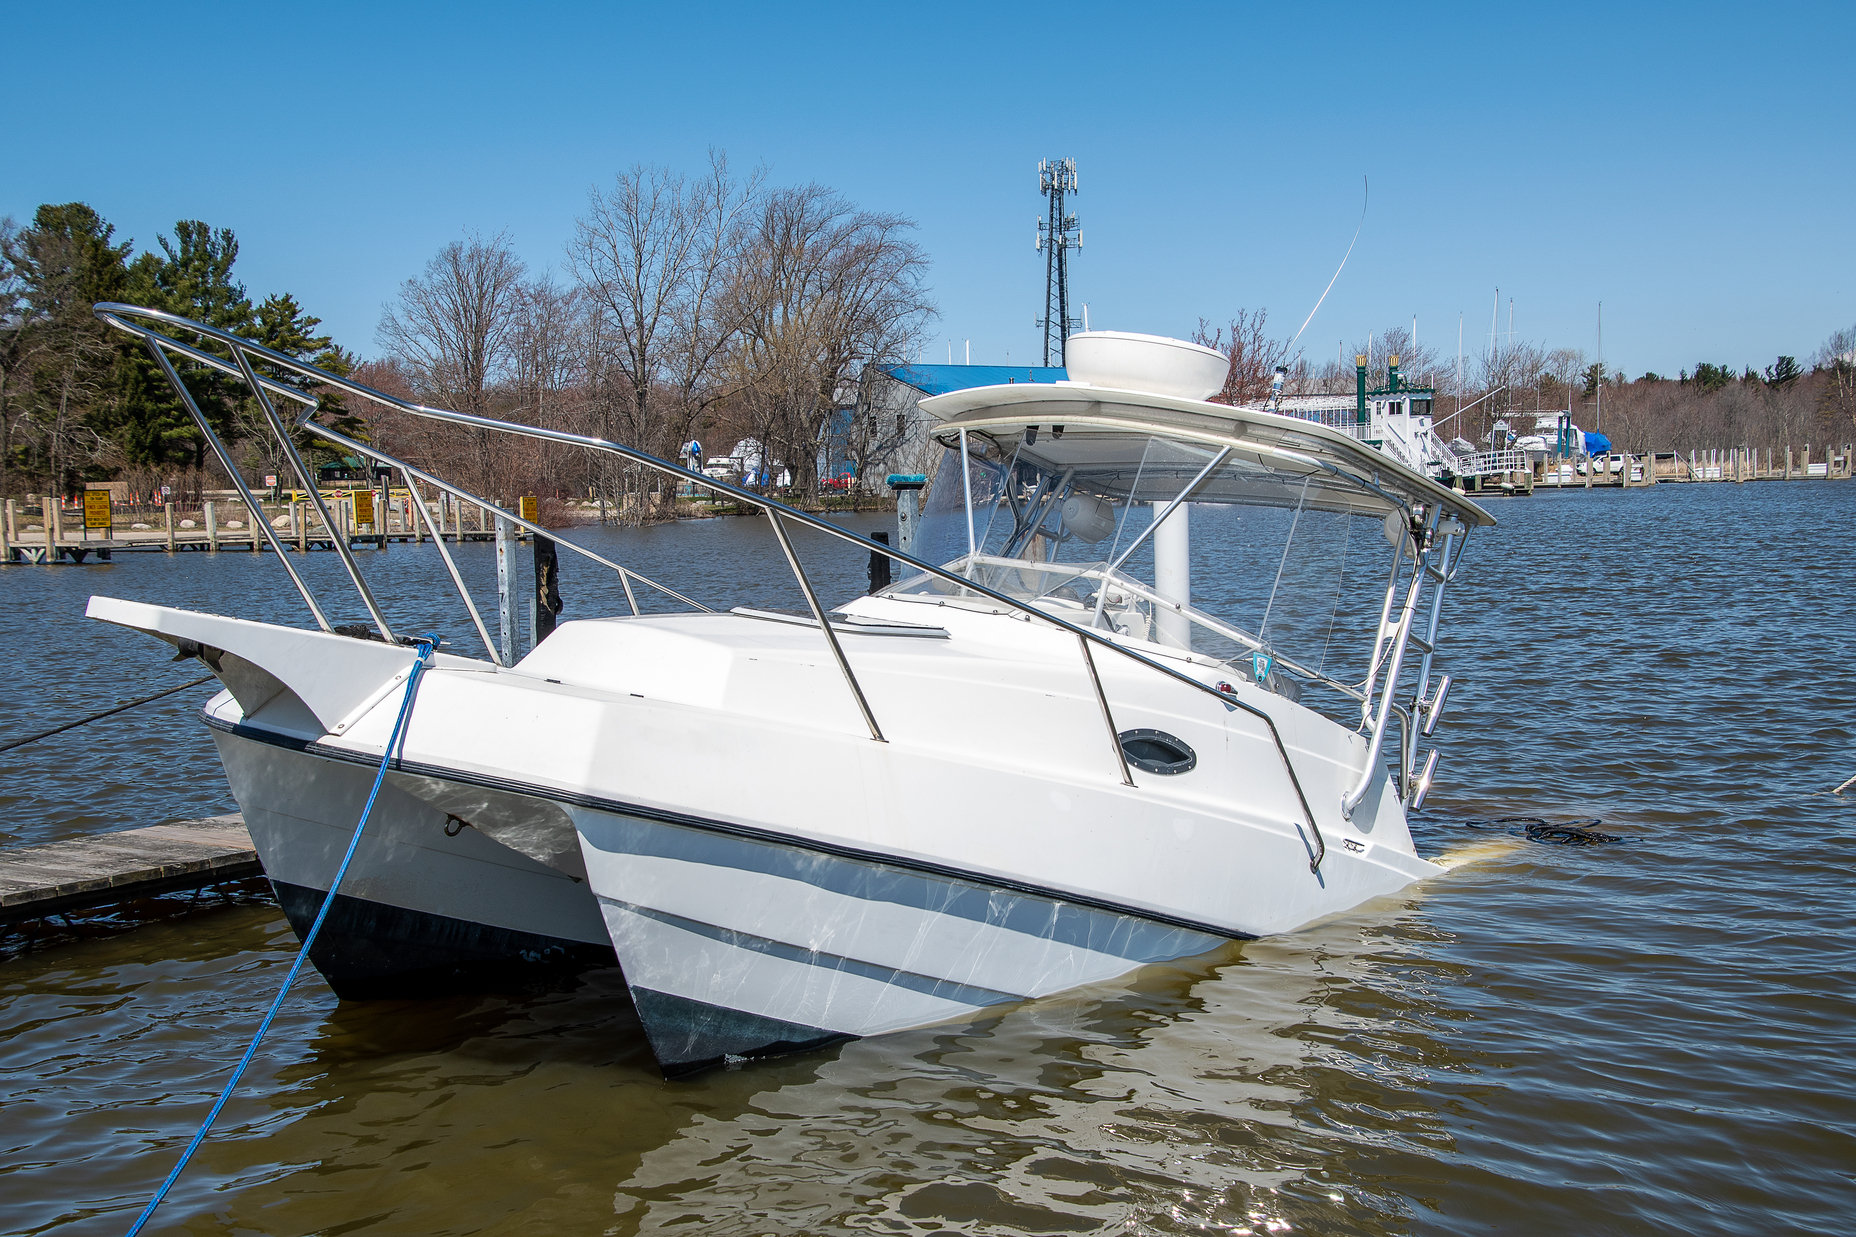 Boat Buyers Beware: 10 Hidden Problems to Look For in Used Boats